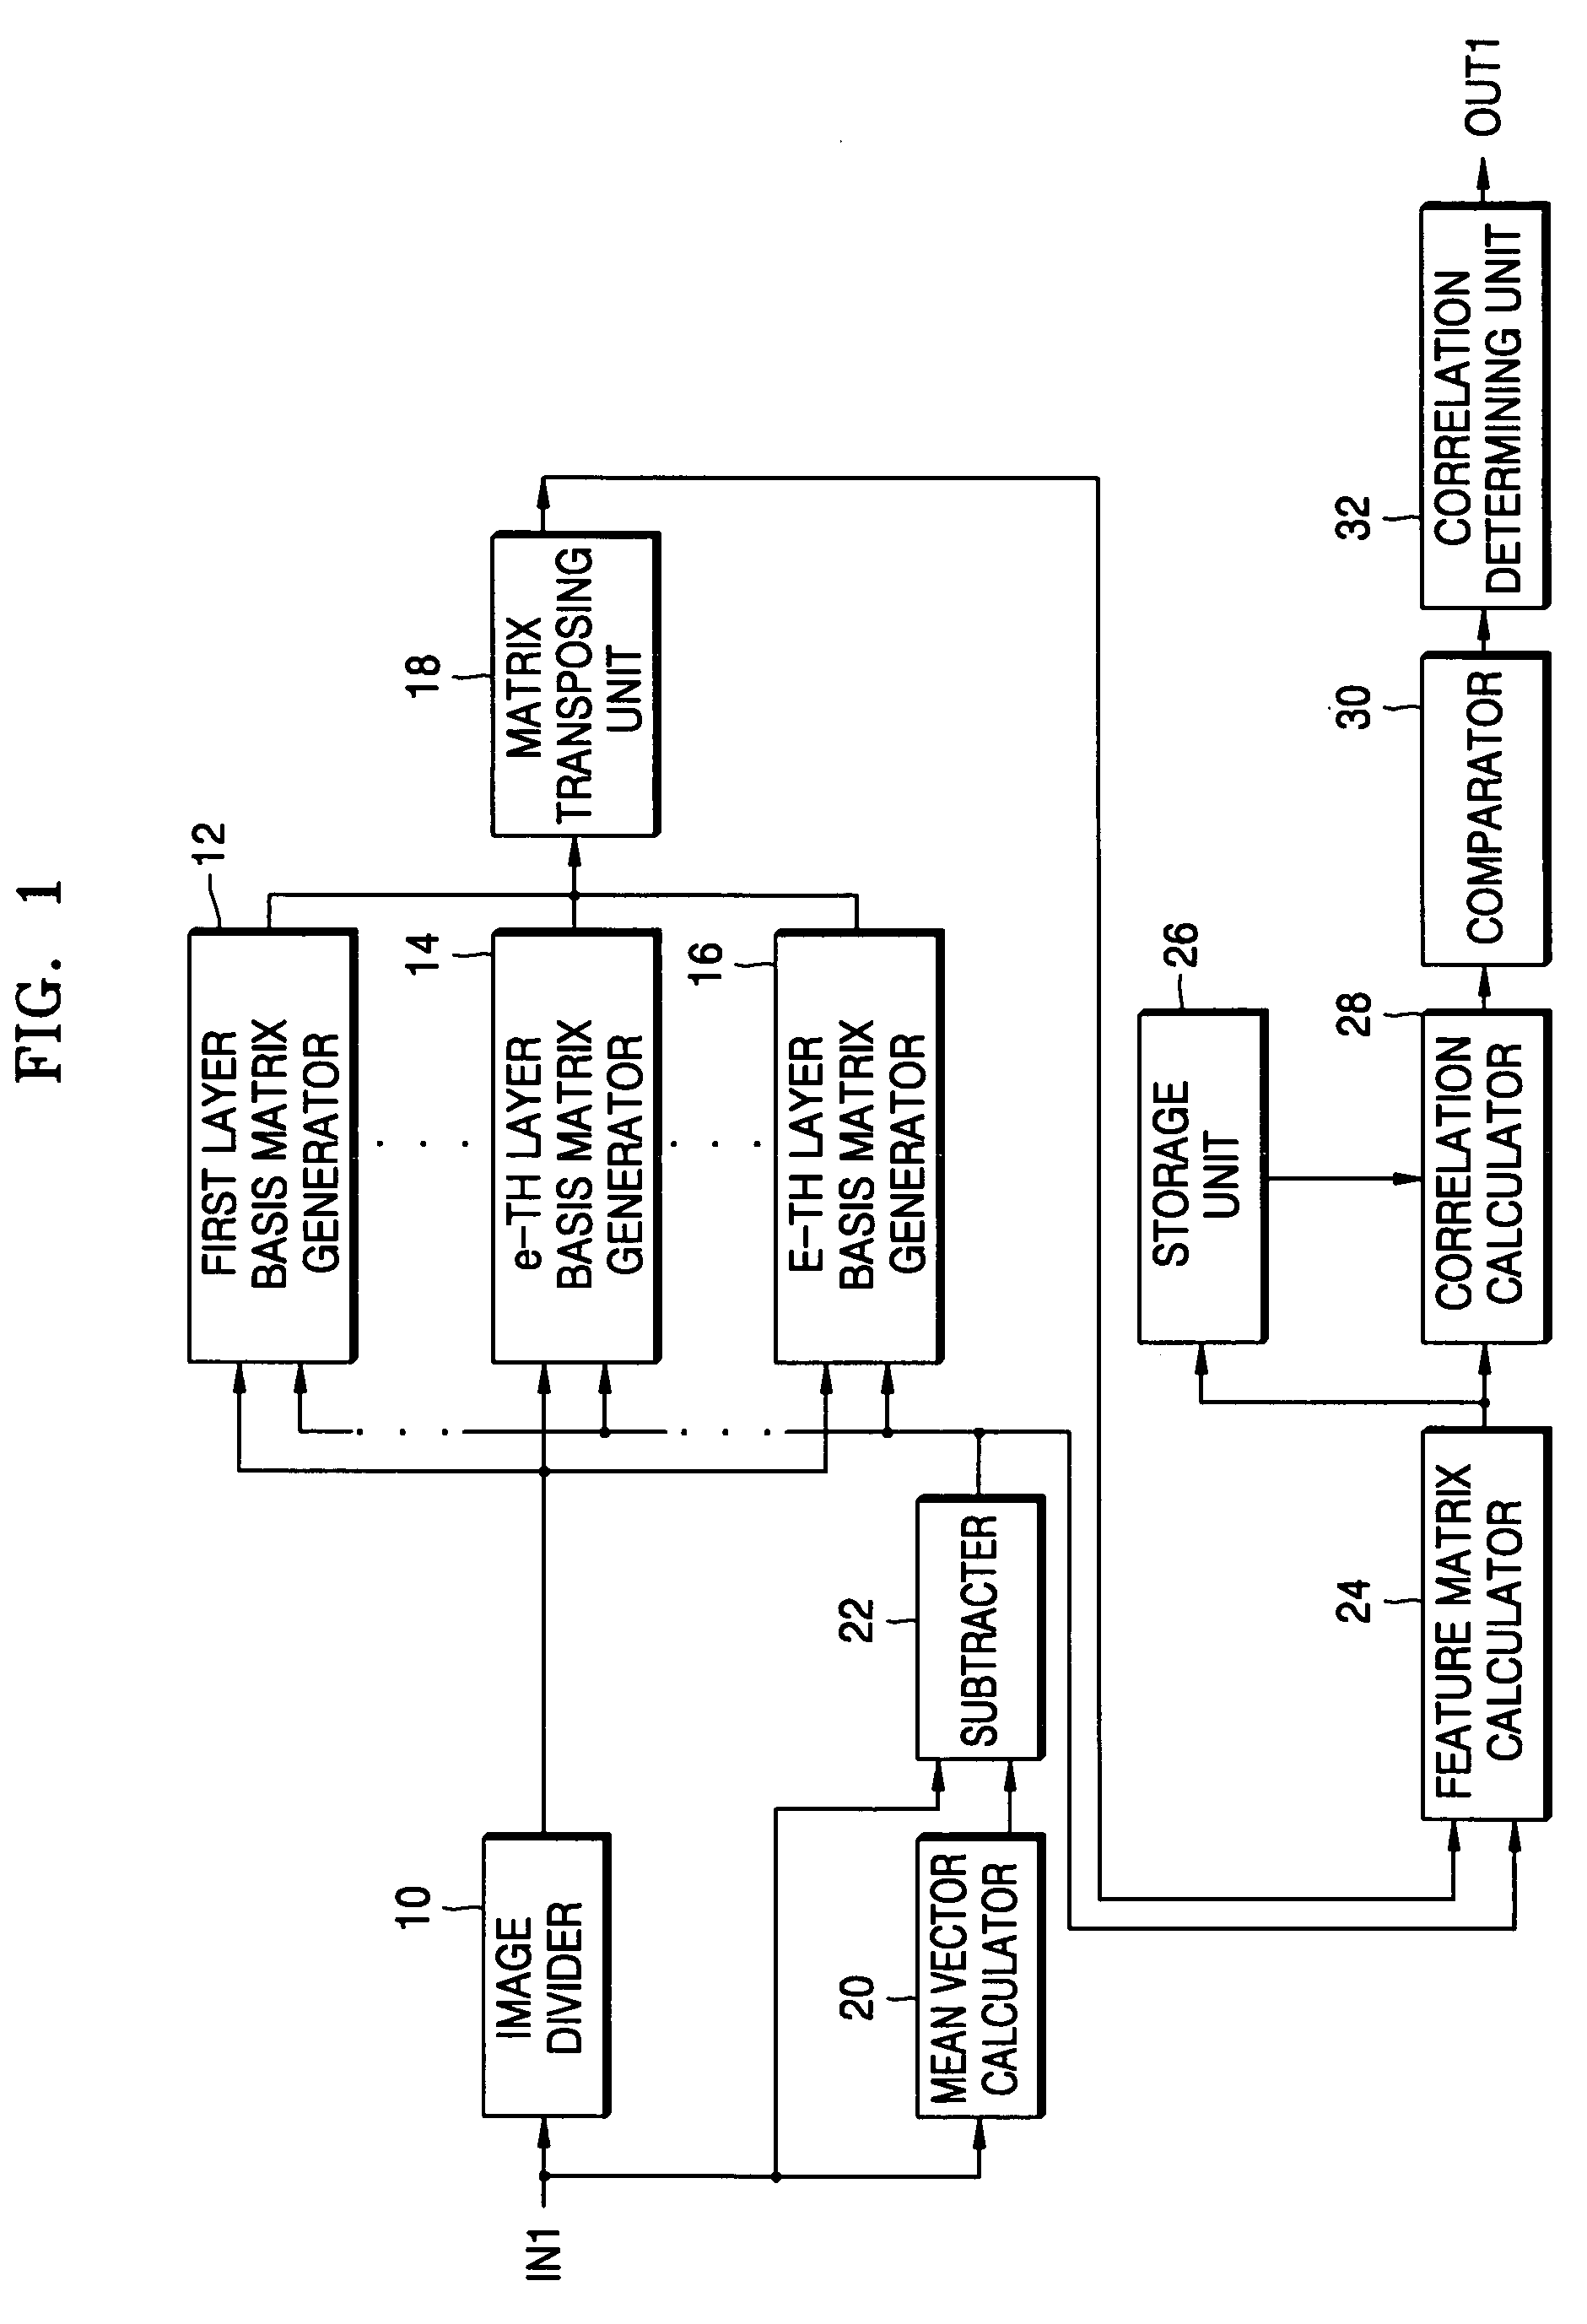 Apparatus and method for processing image based on layers